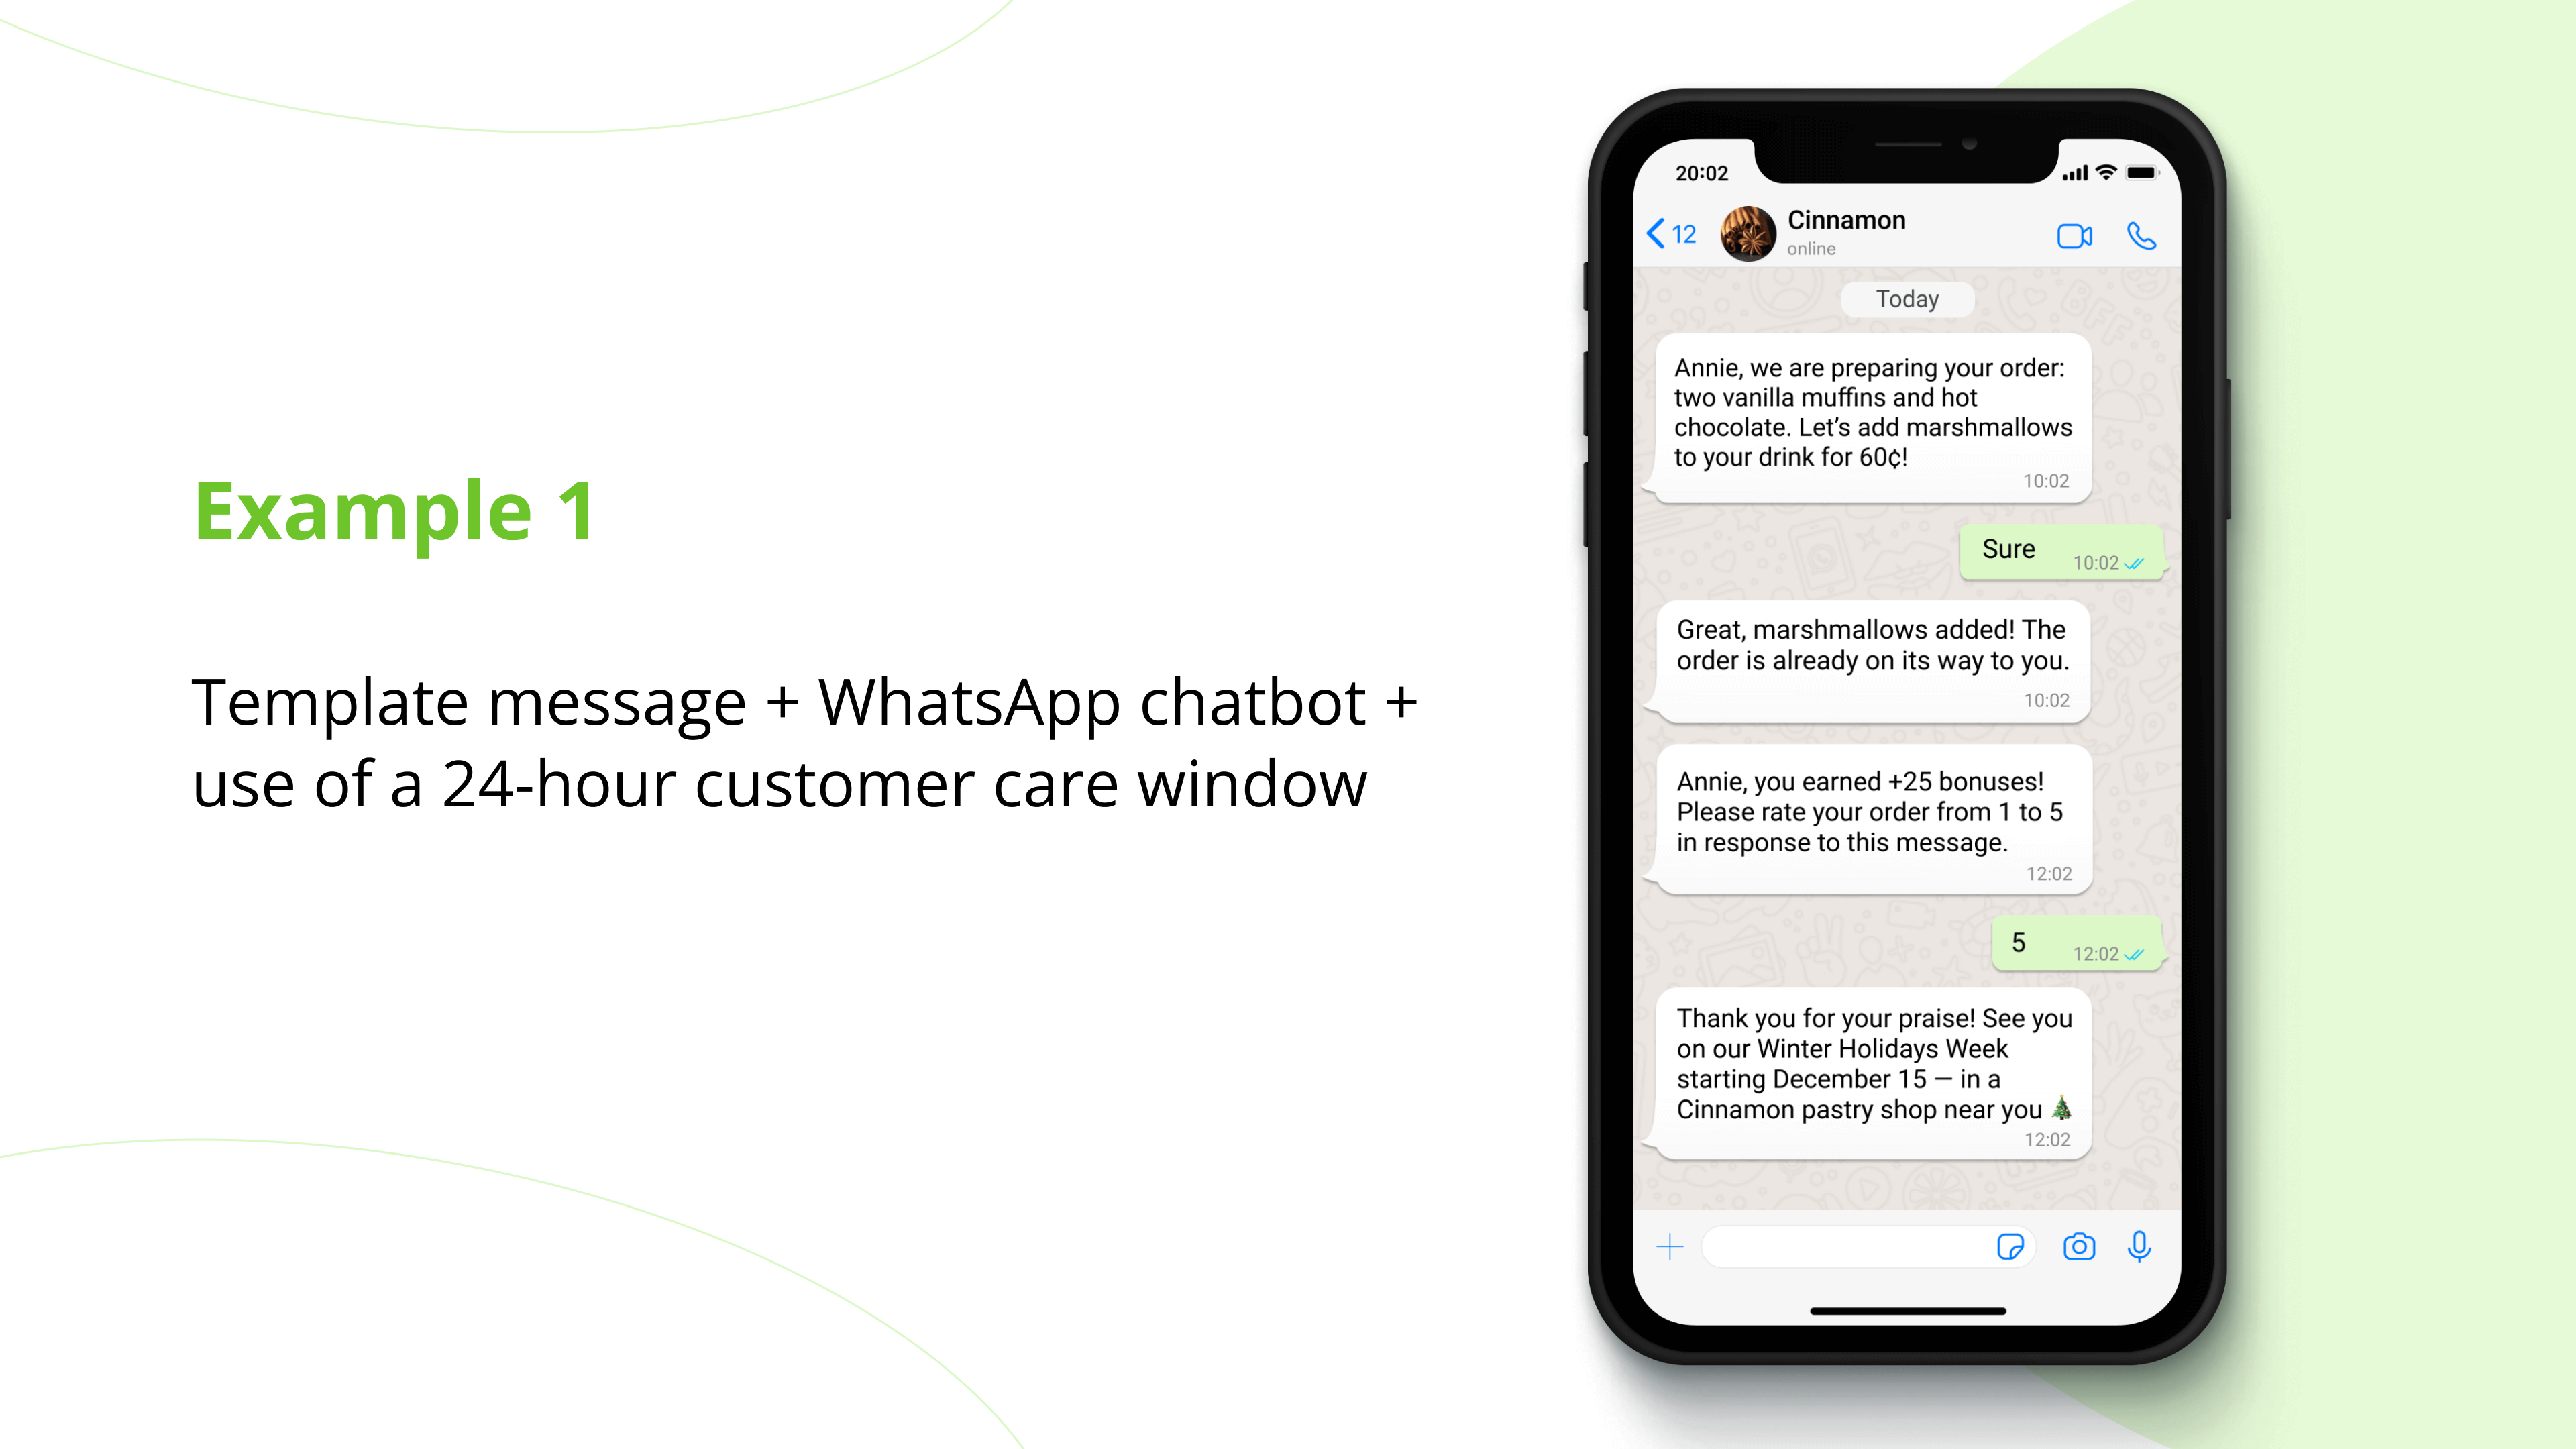 WhatsApp marketing campaign example: Template message + WhatsApp chatbot + use of a 24-hour customer care window